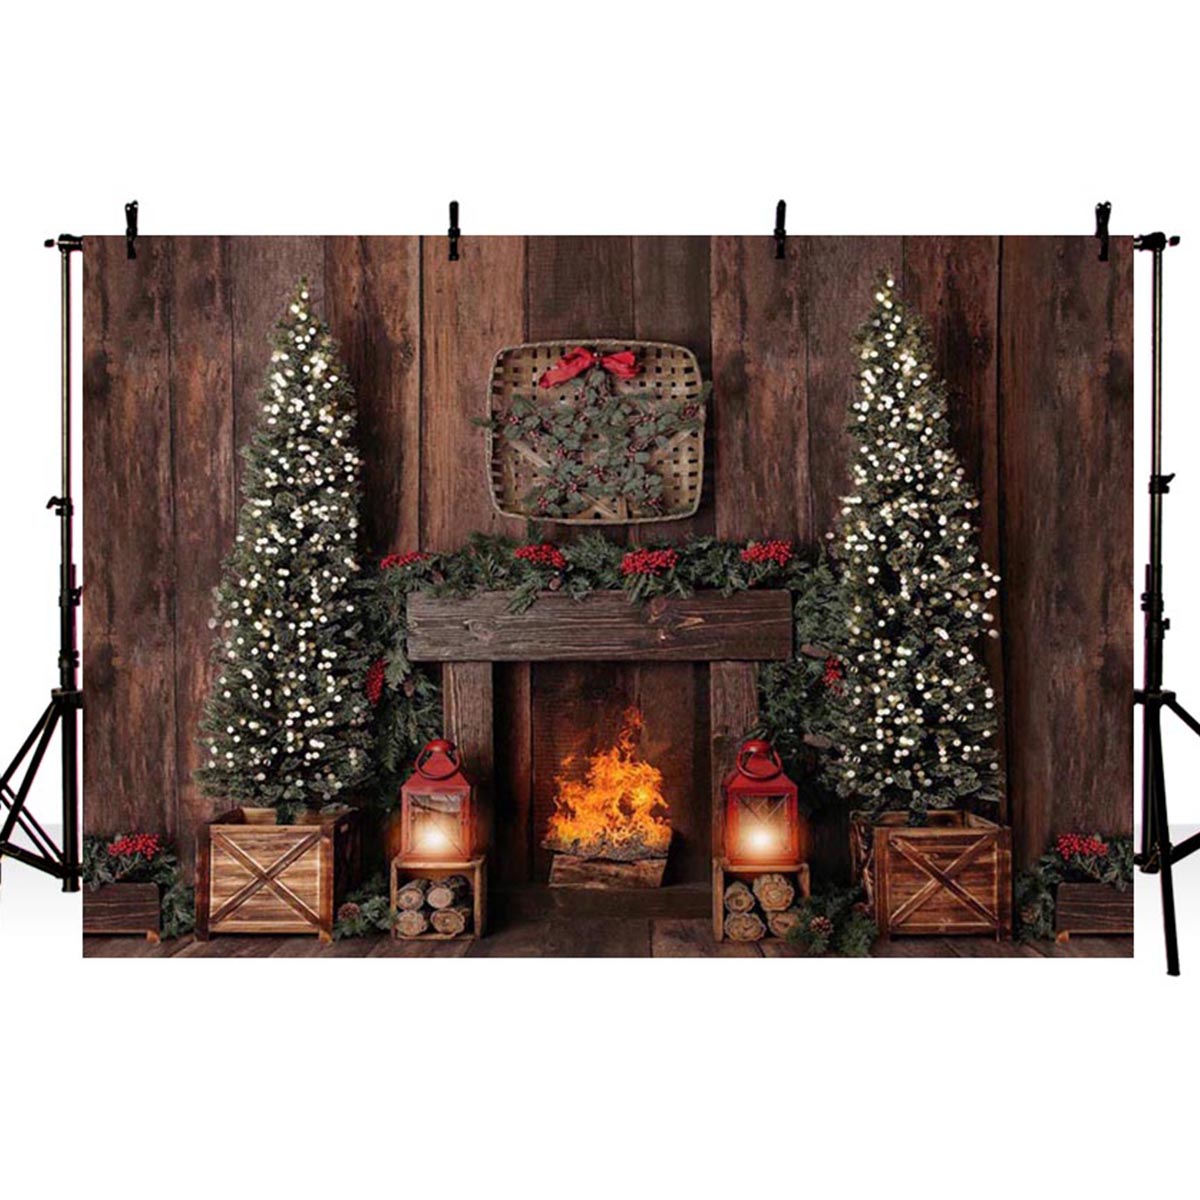 5x3FT-7x5FT-8x6FT-Wooden-Christmas-Fireplace-Photography-Backdrop-Background-Studio-Prop-1610115